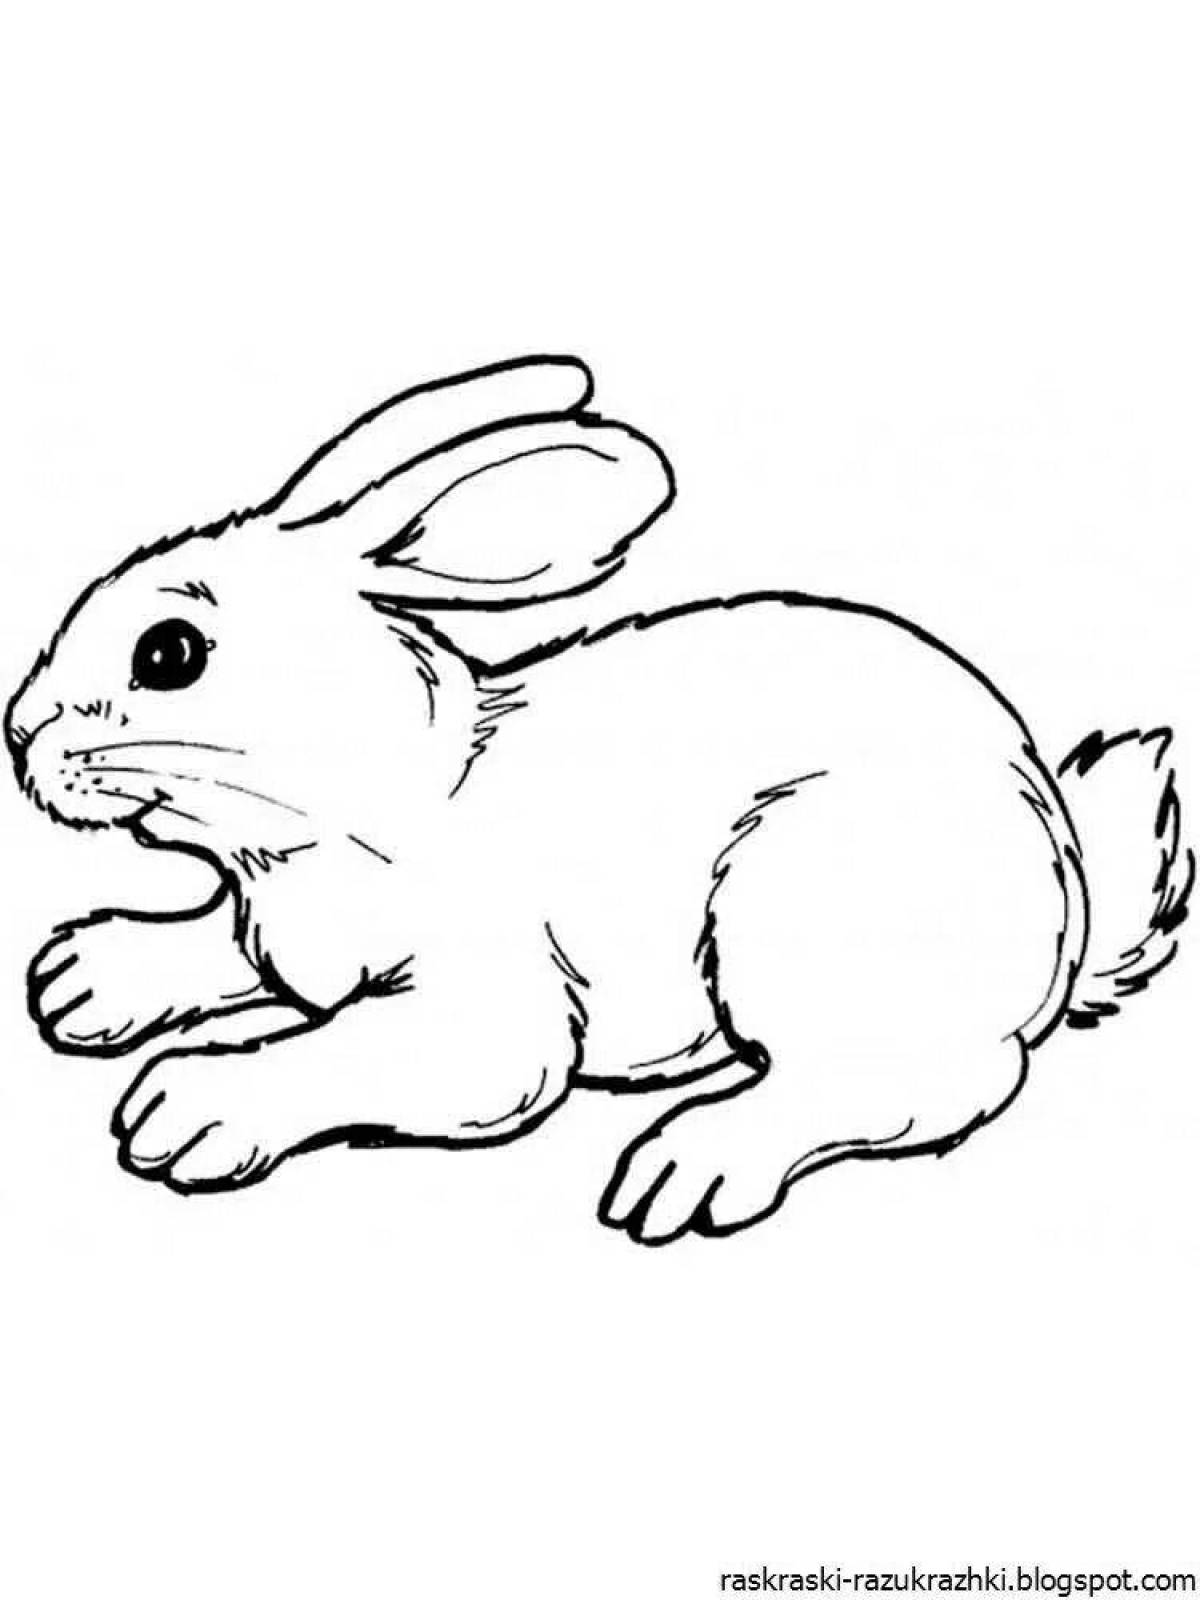 A fun rabbit coloring book for kids